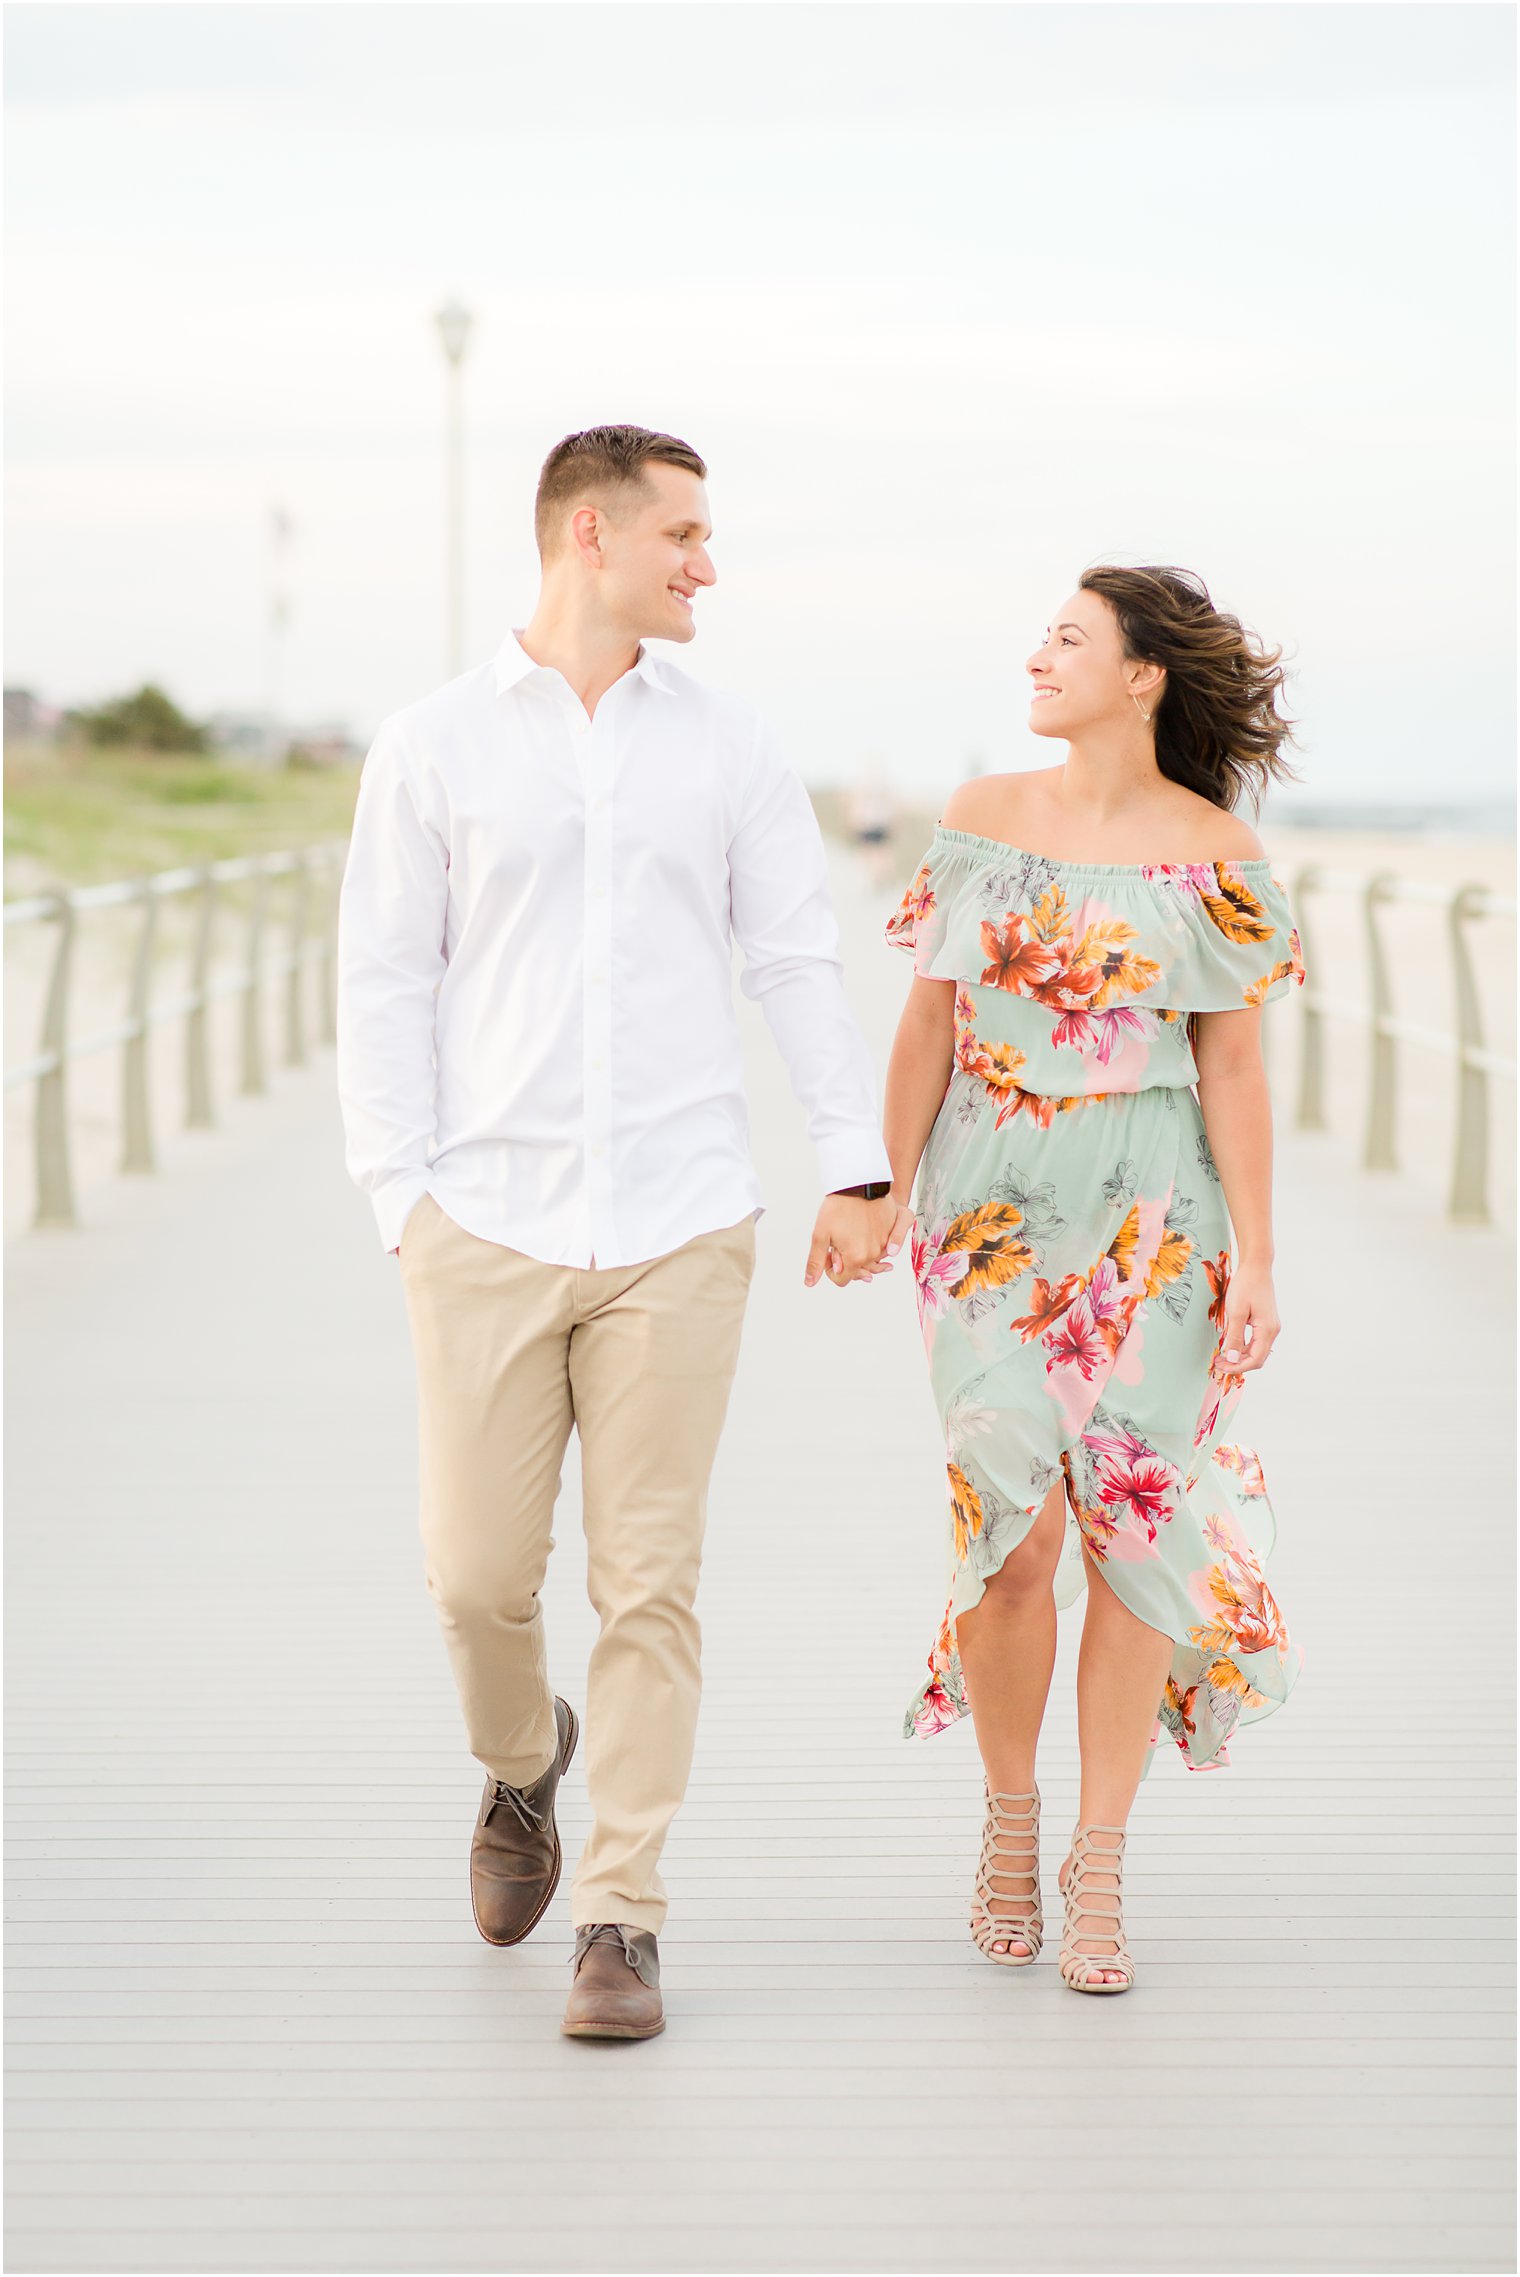 Engagement photos at the beach by Spring Lake Wedding Photographer